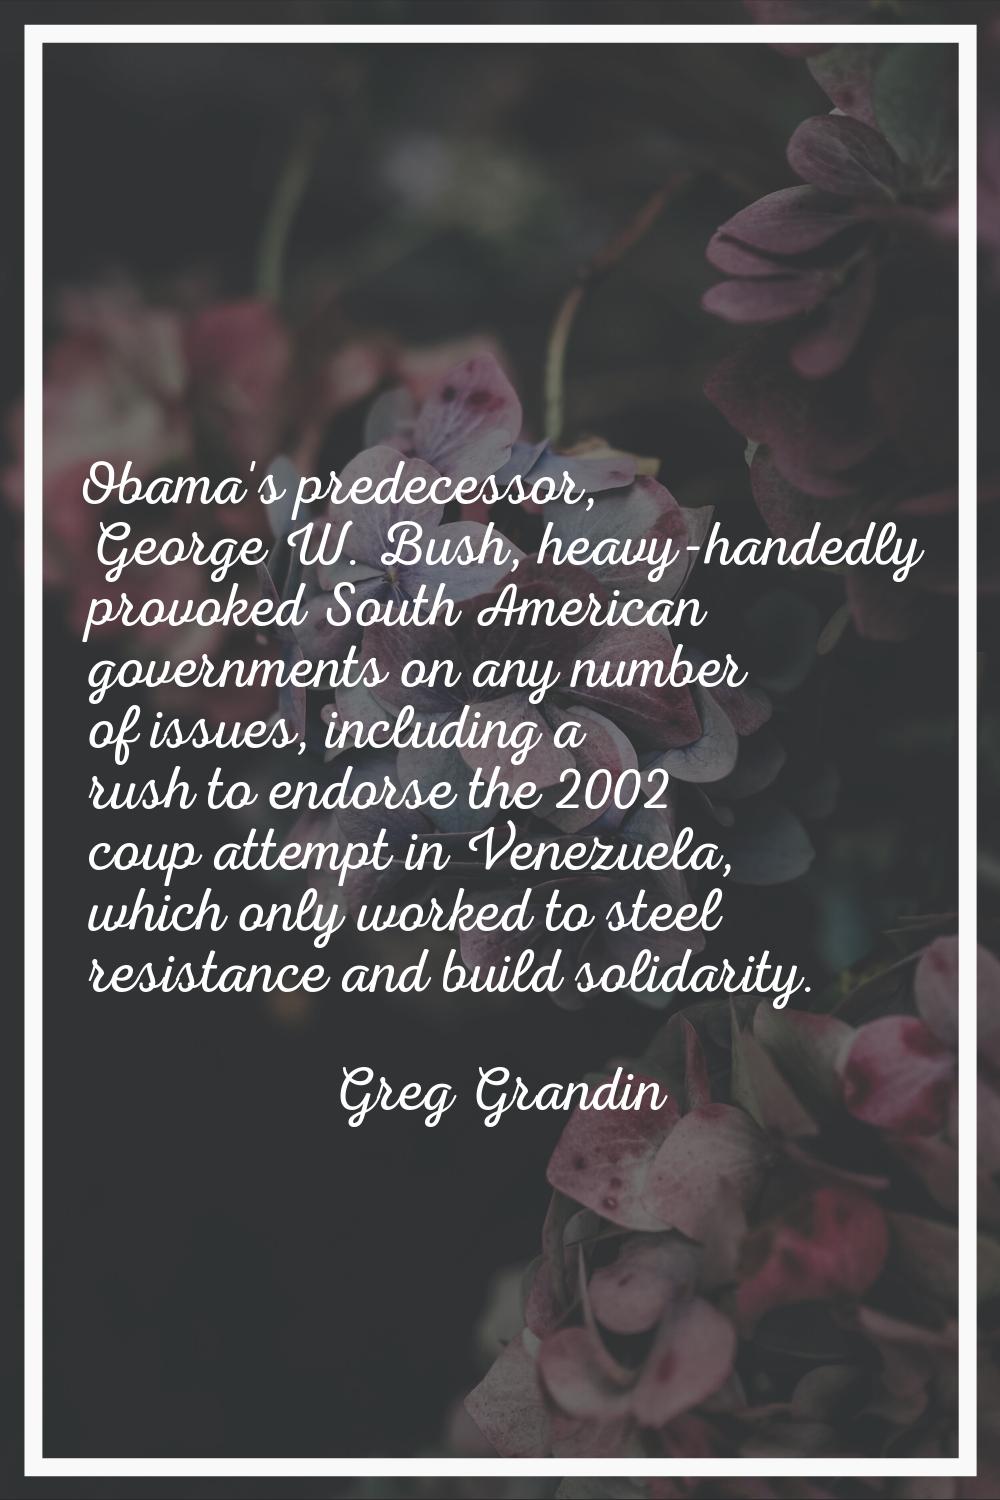 Obama's predecessor, George W. Bush, heavy-handedly provoked South American governments on any numb